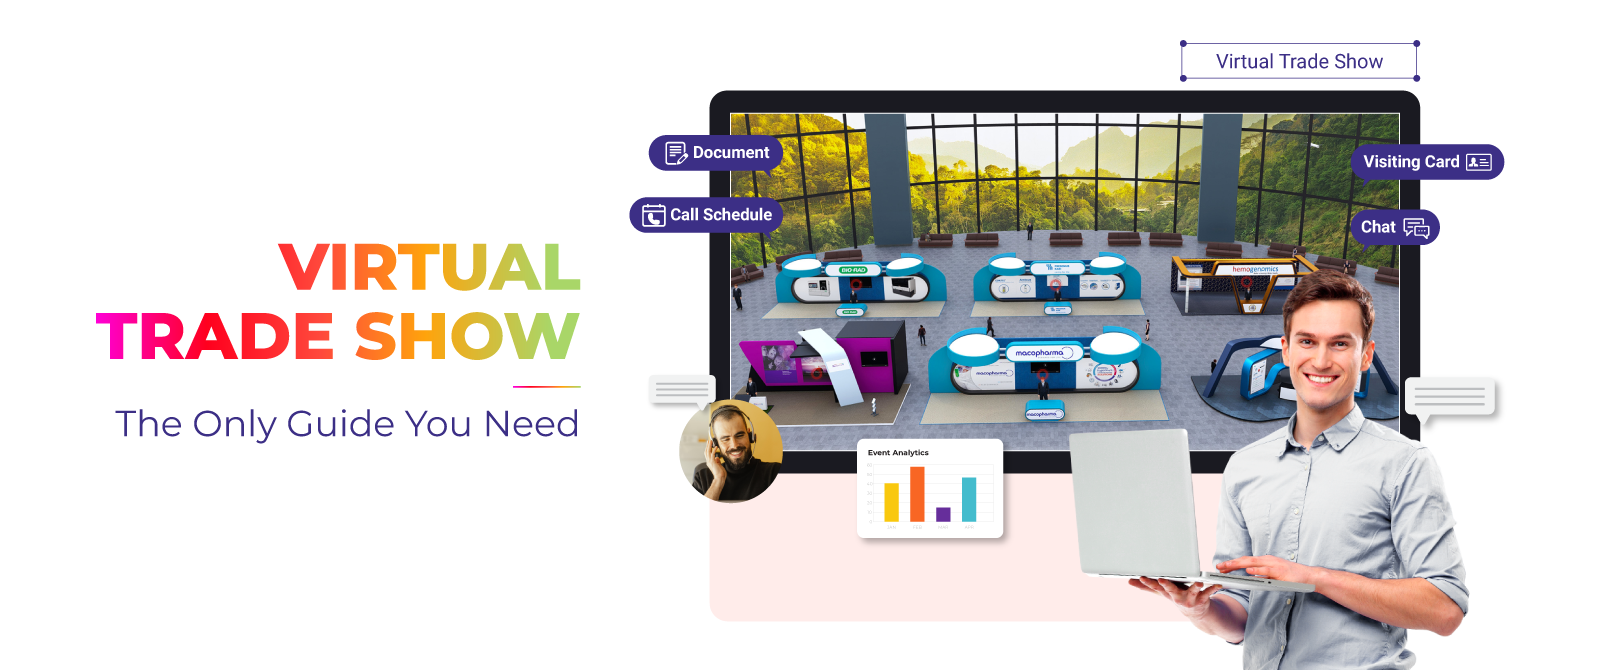 Virtual Trade Show – The Only Guide You Need